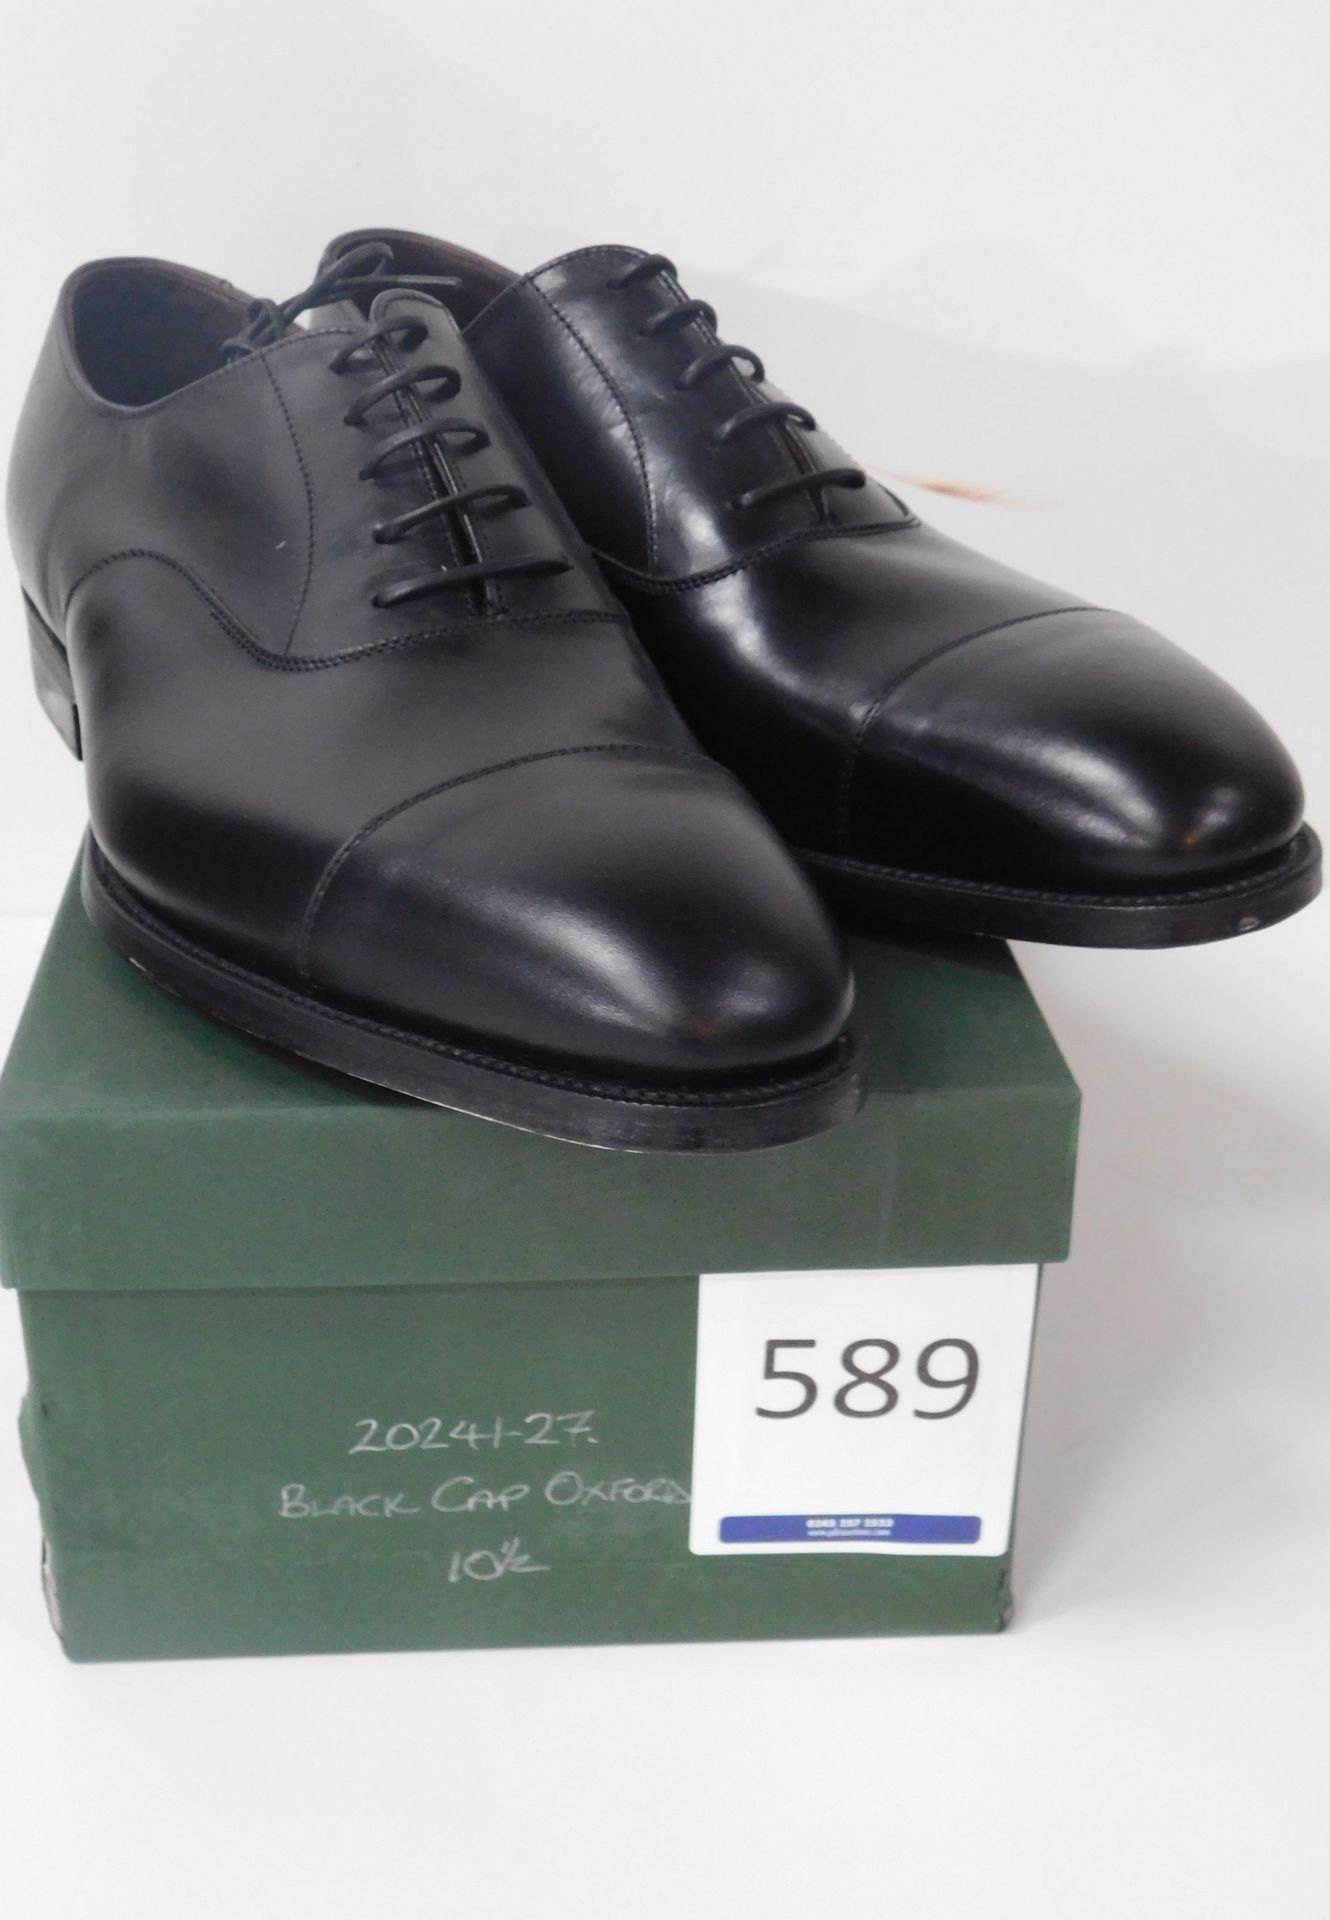 Sid Mashburn Black CAP Oxford Size 10.5 (Slight Seconds) (Location: Brentwood – See General Notes)